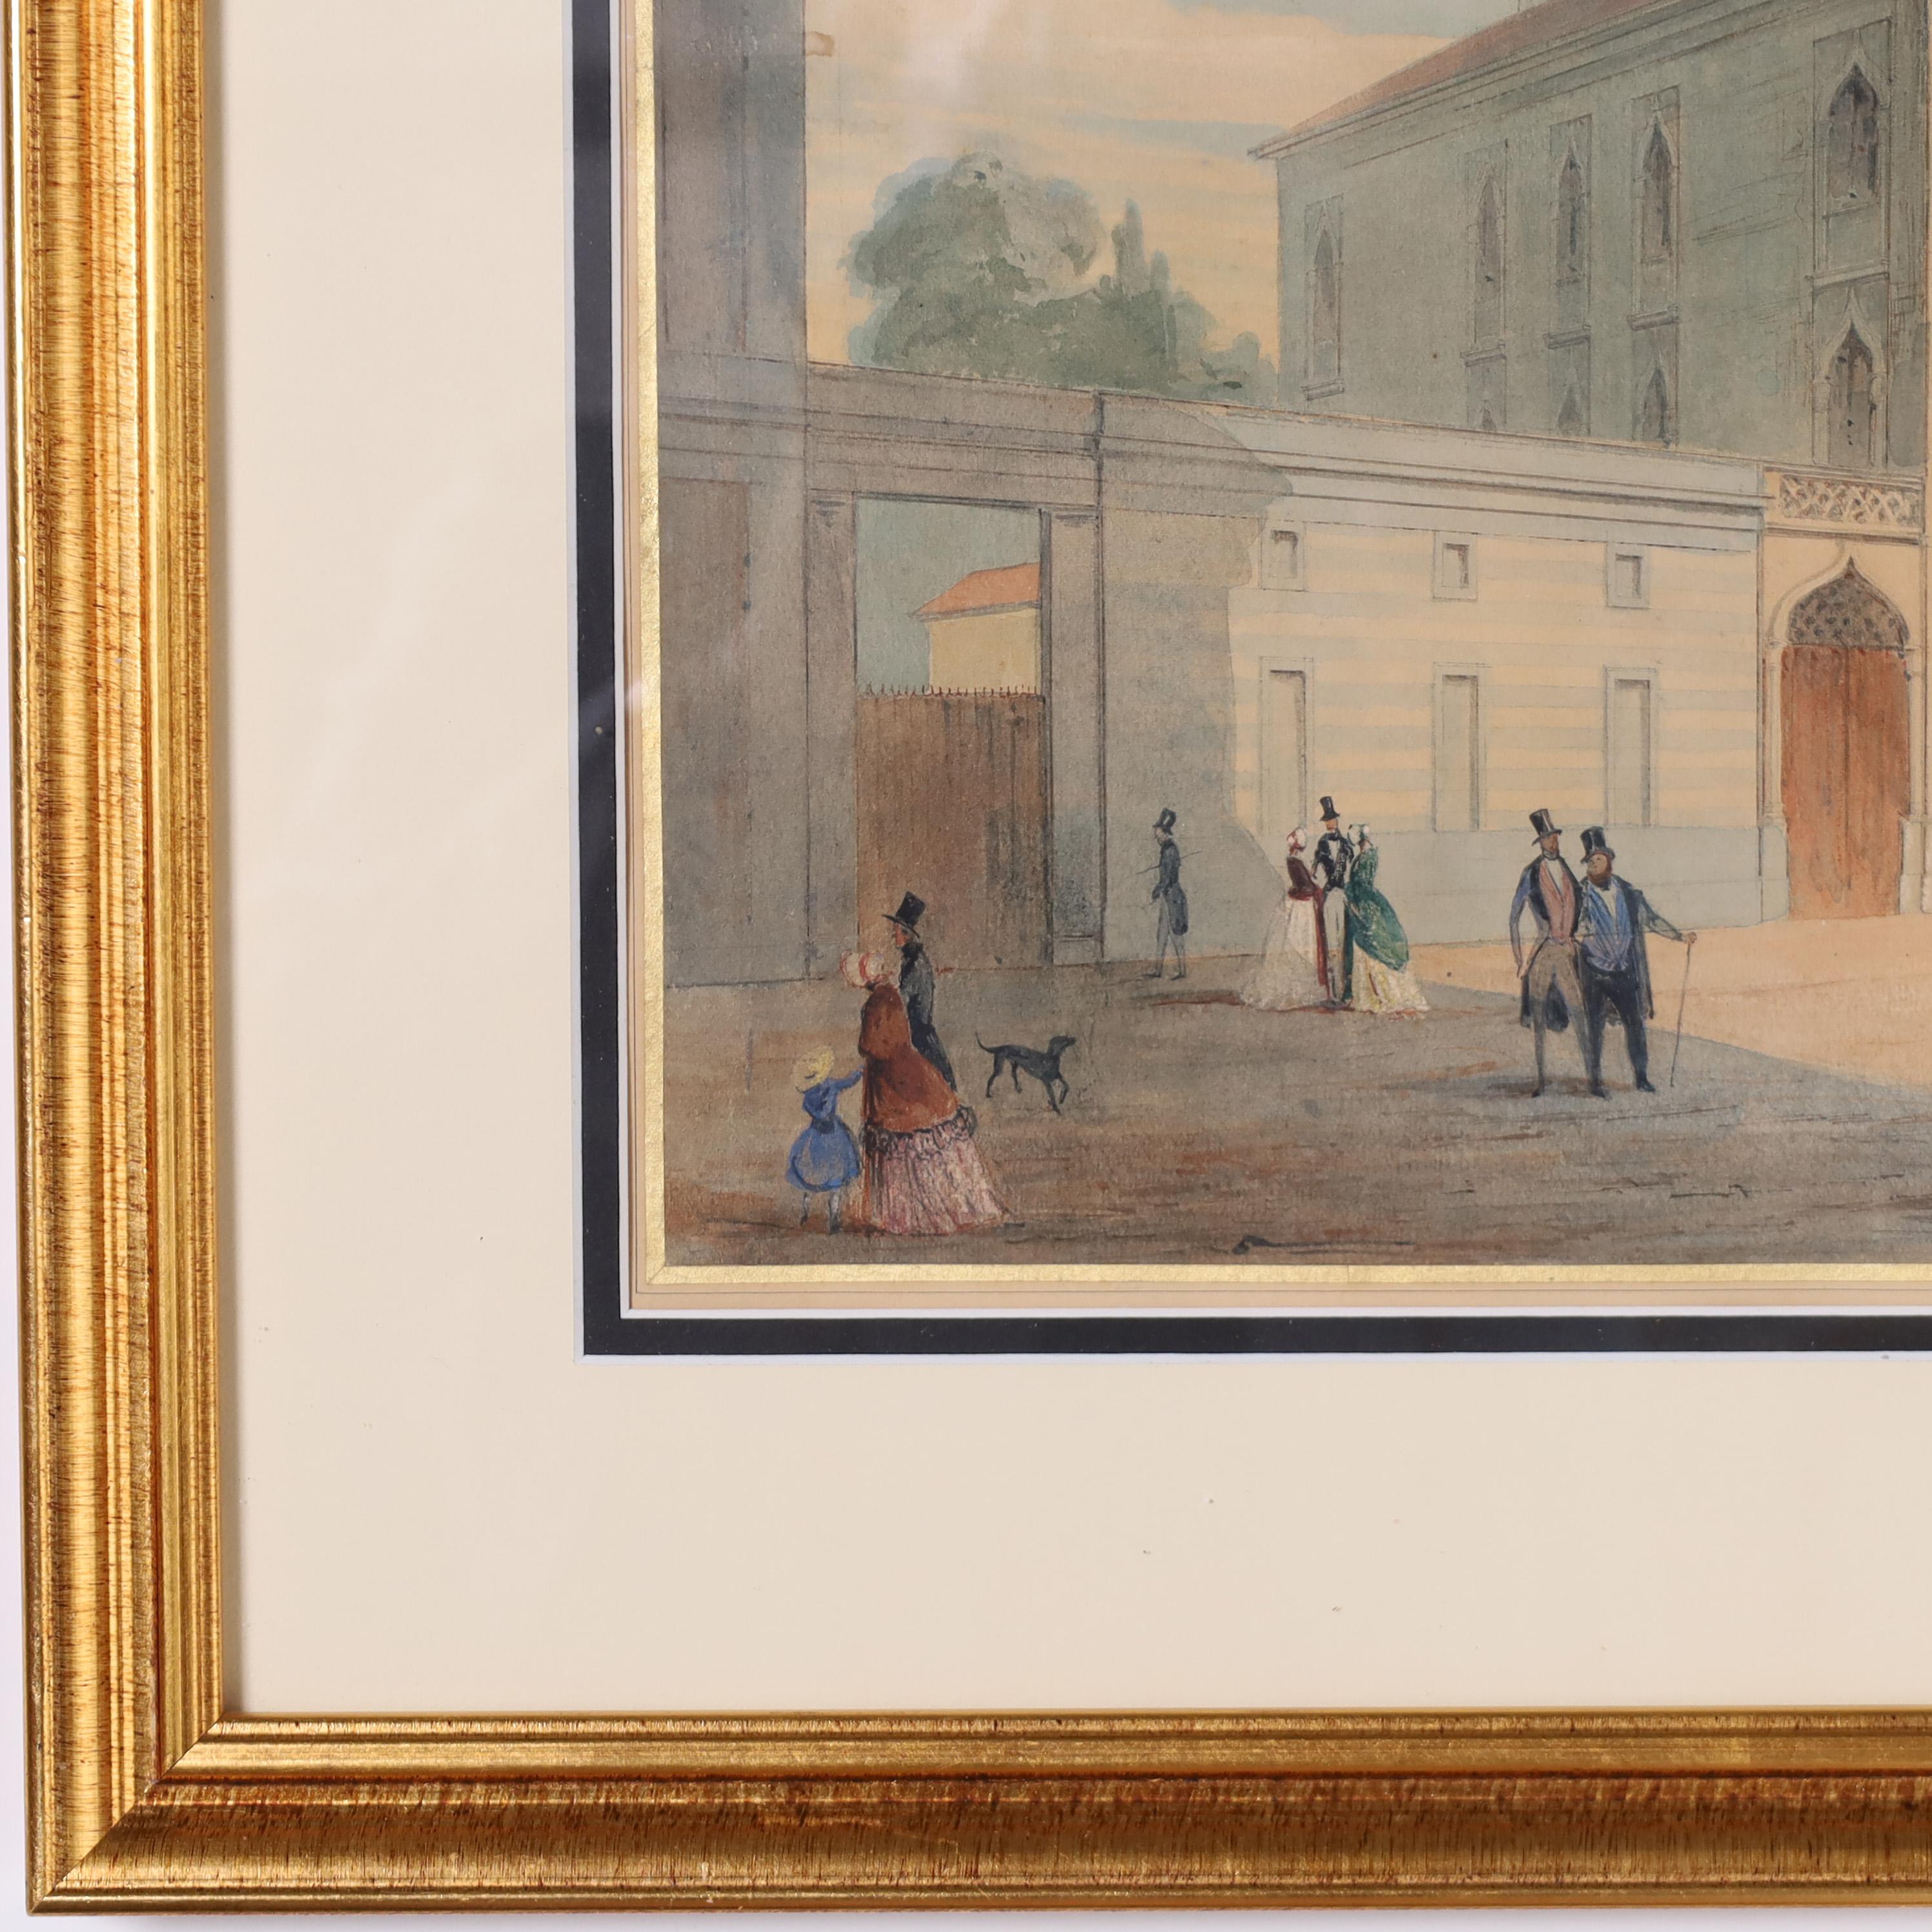 Remarkable 19th century watercolor on paper depicting a sunny day in french Algeria with figures, horses and a dog in the distinctive architecture. Presented under glass in a gilt wood frame.